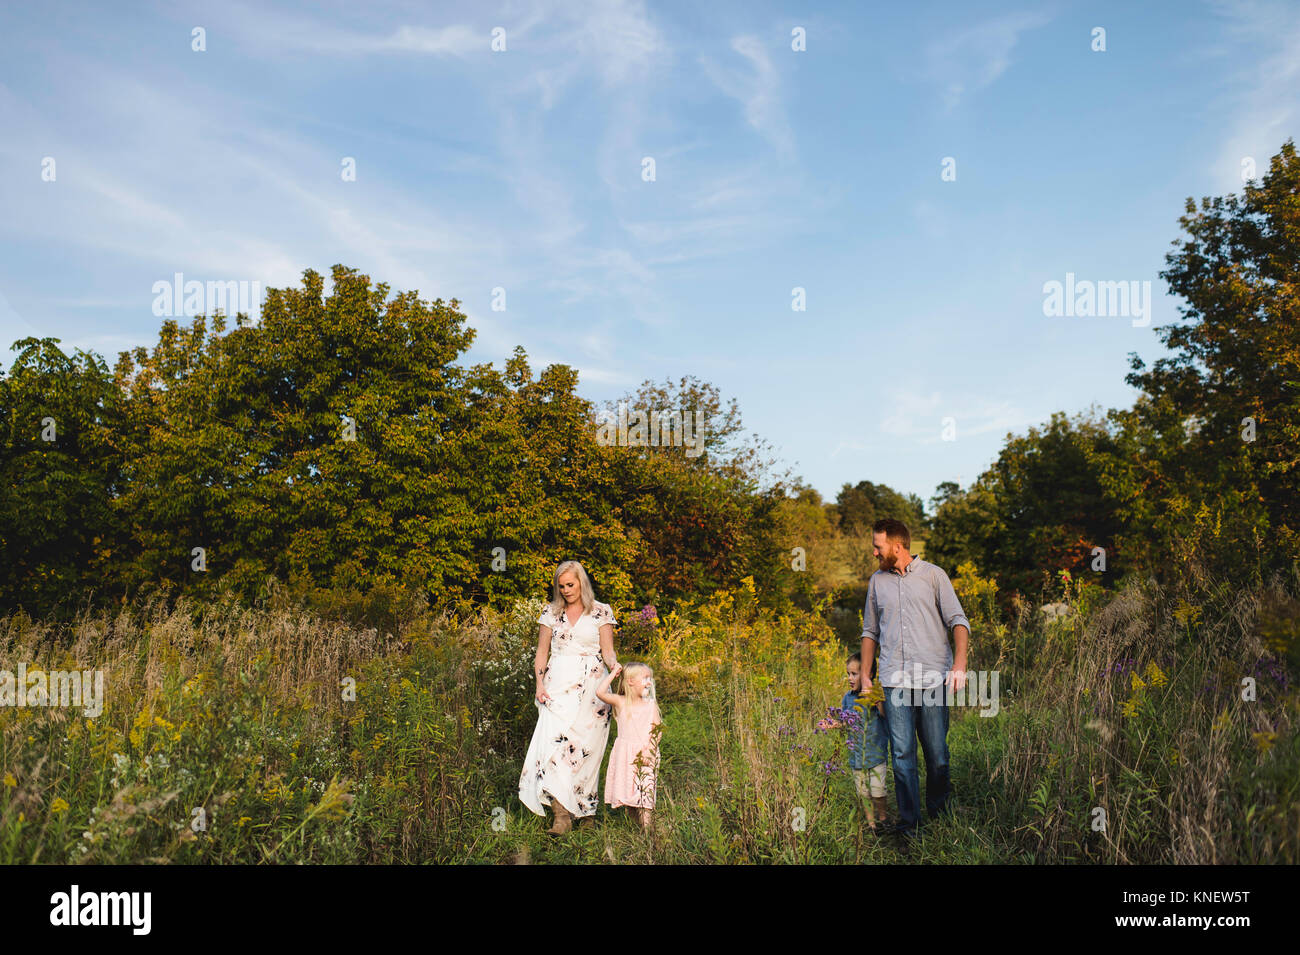 Family walking in tall grass together Stock Photo